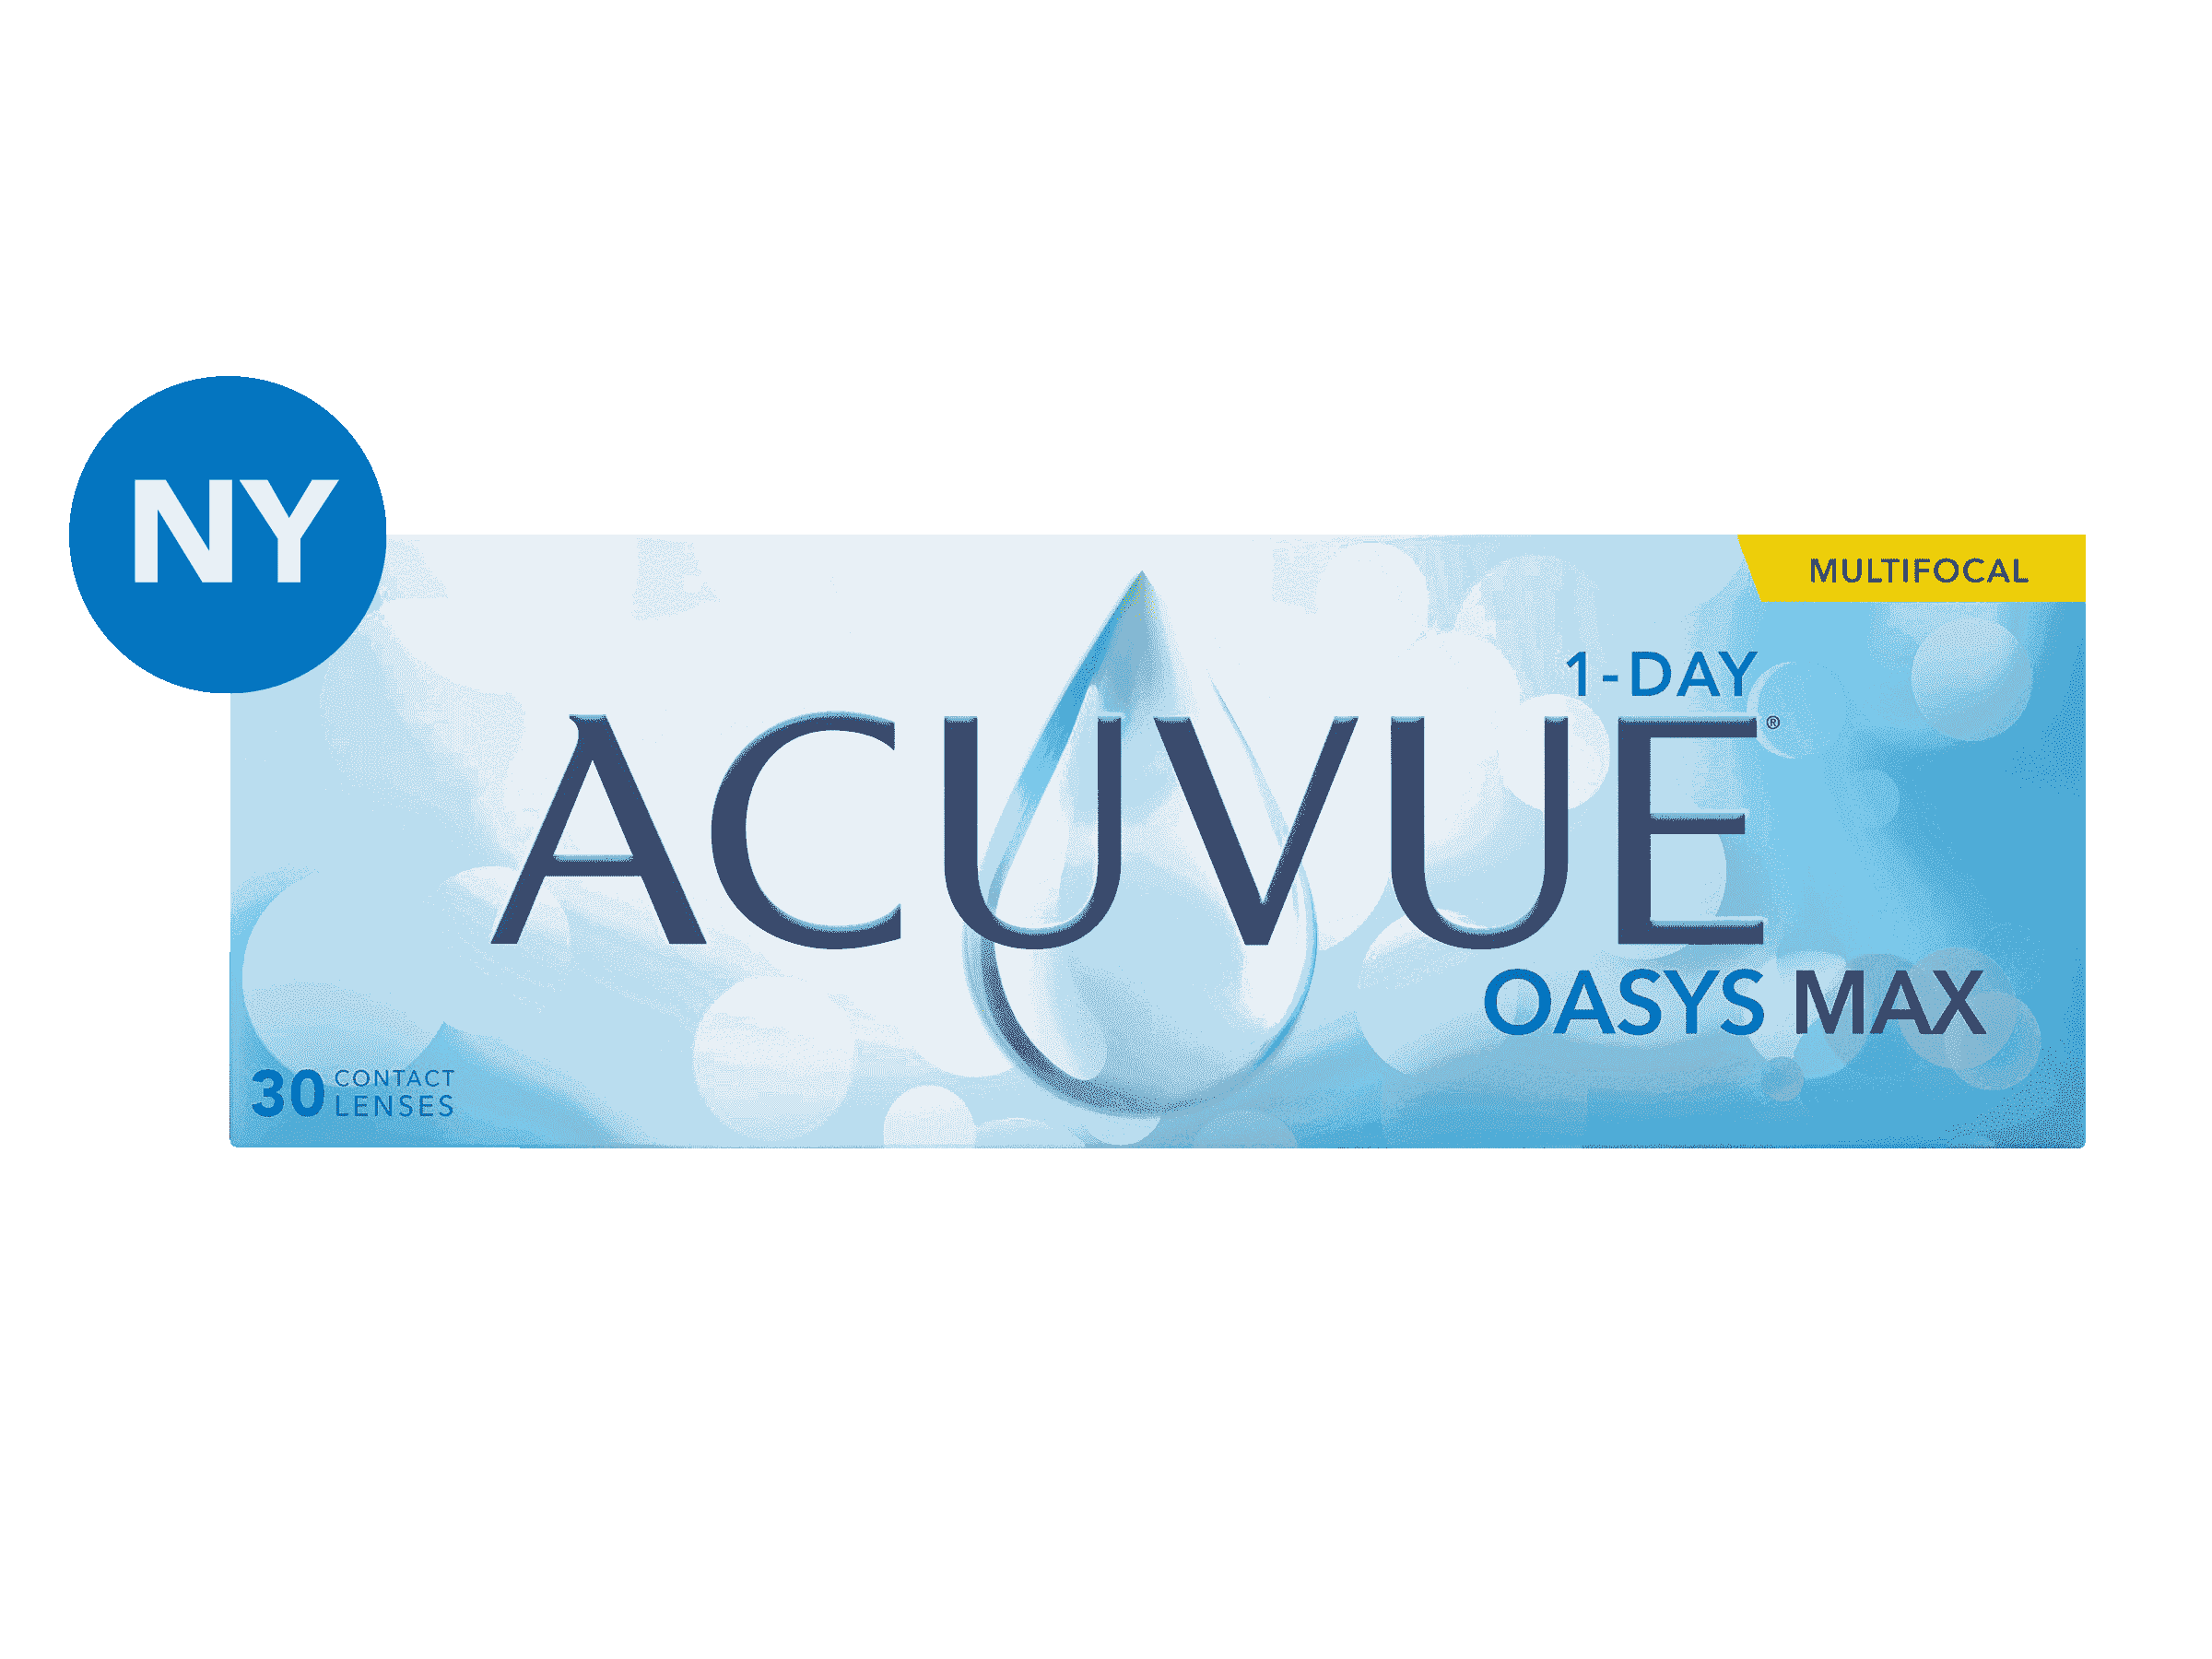 acuvue-oasys-max-1-day-multifocal-med-tearstable-technology-optiblue